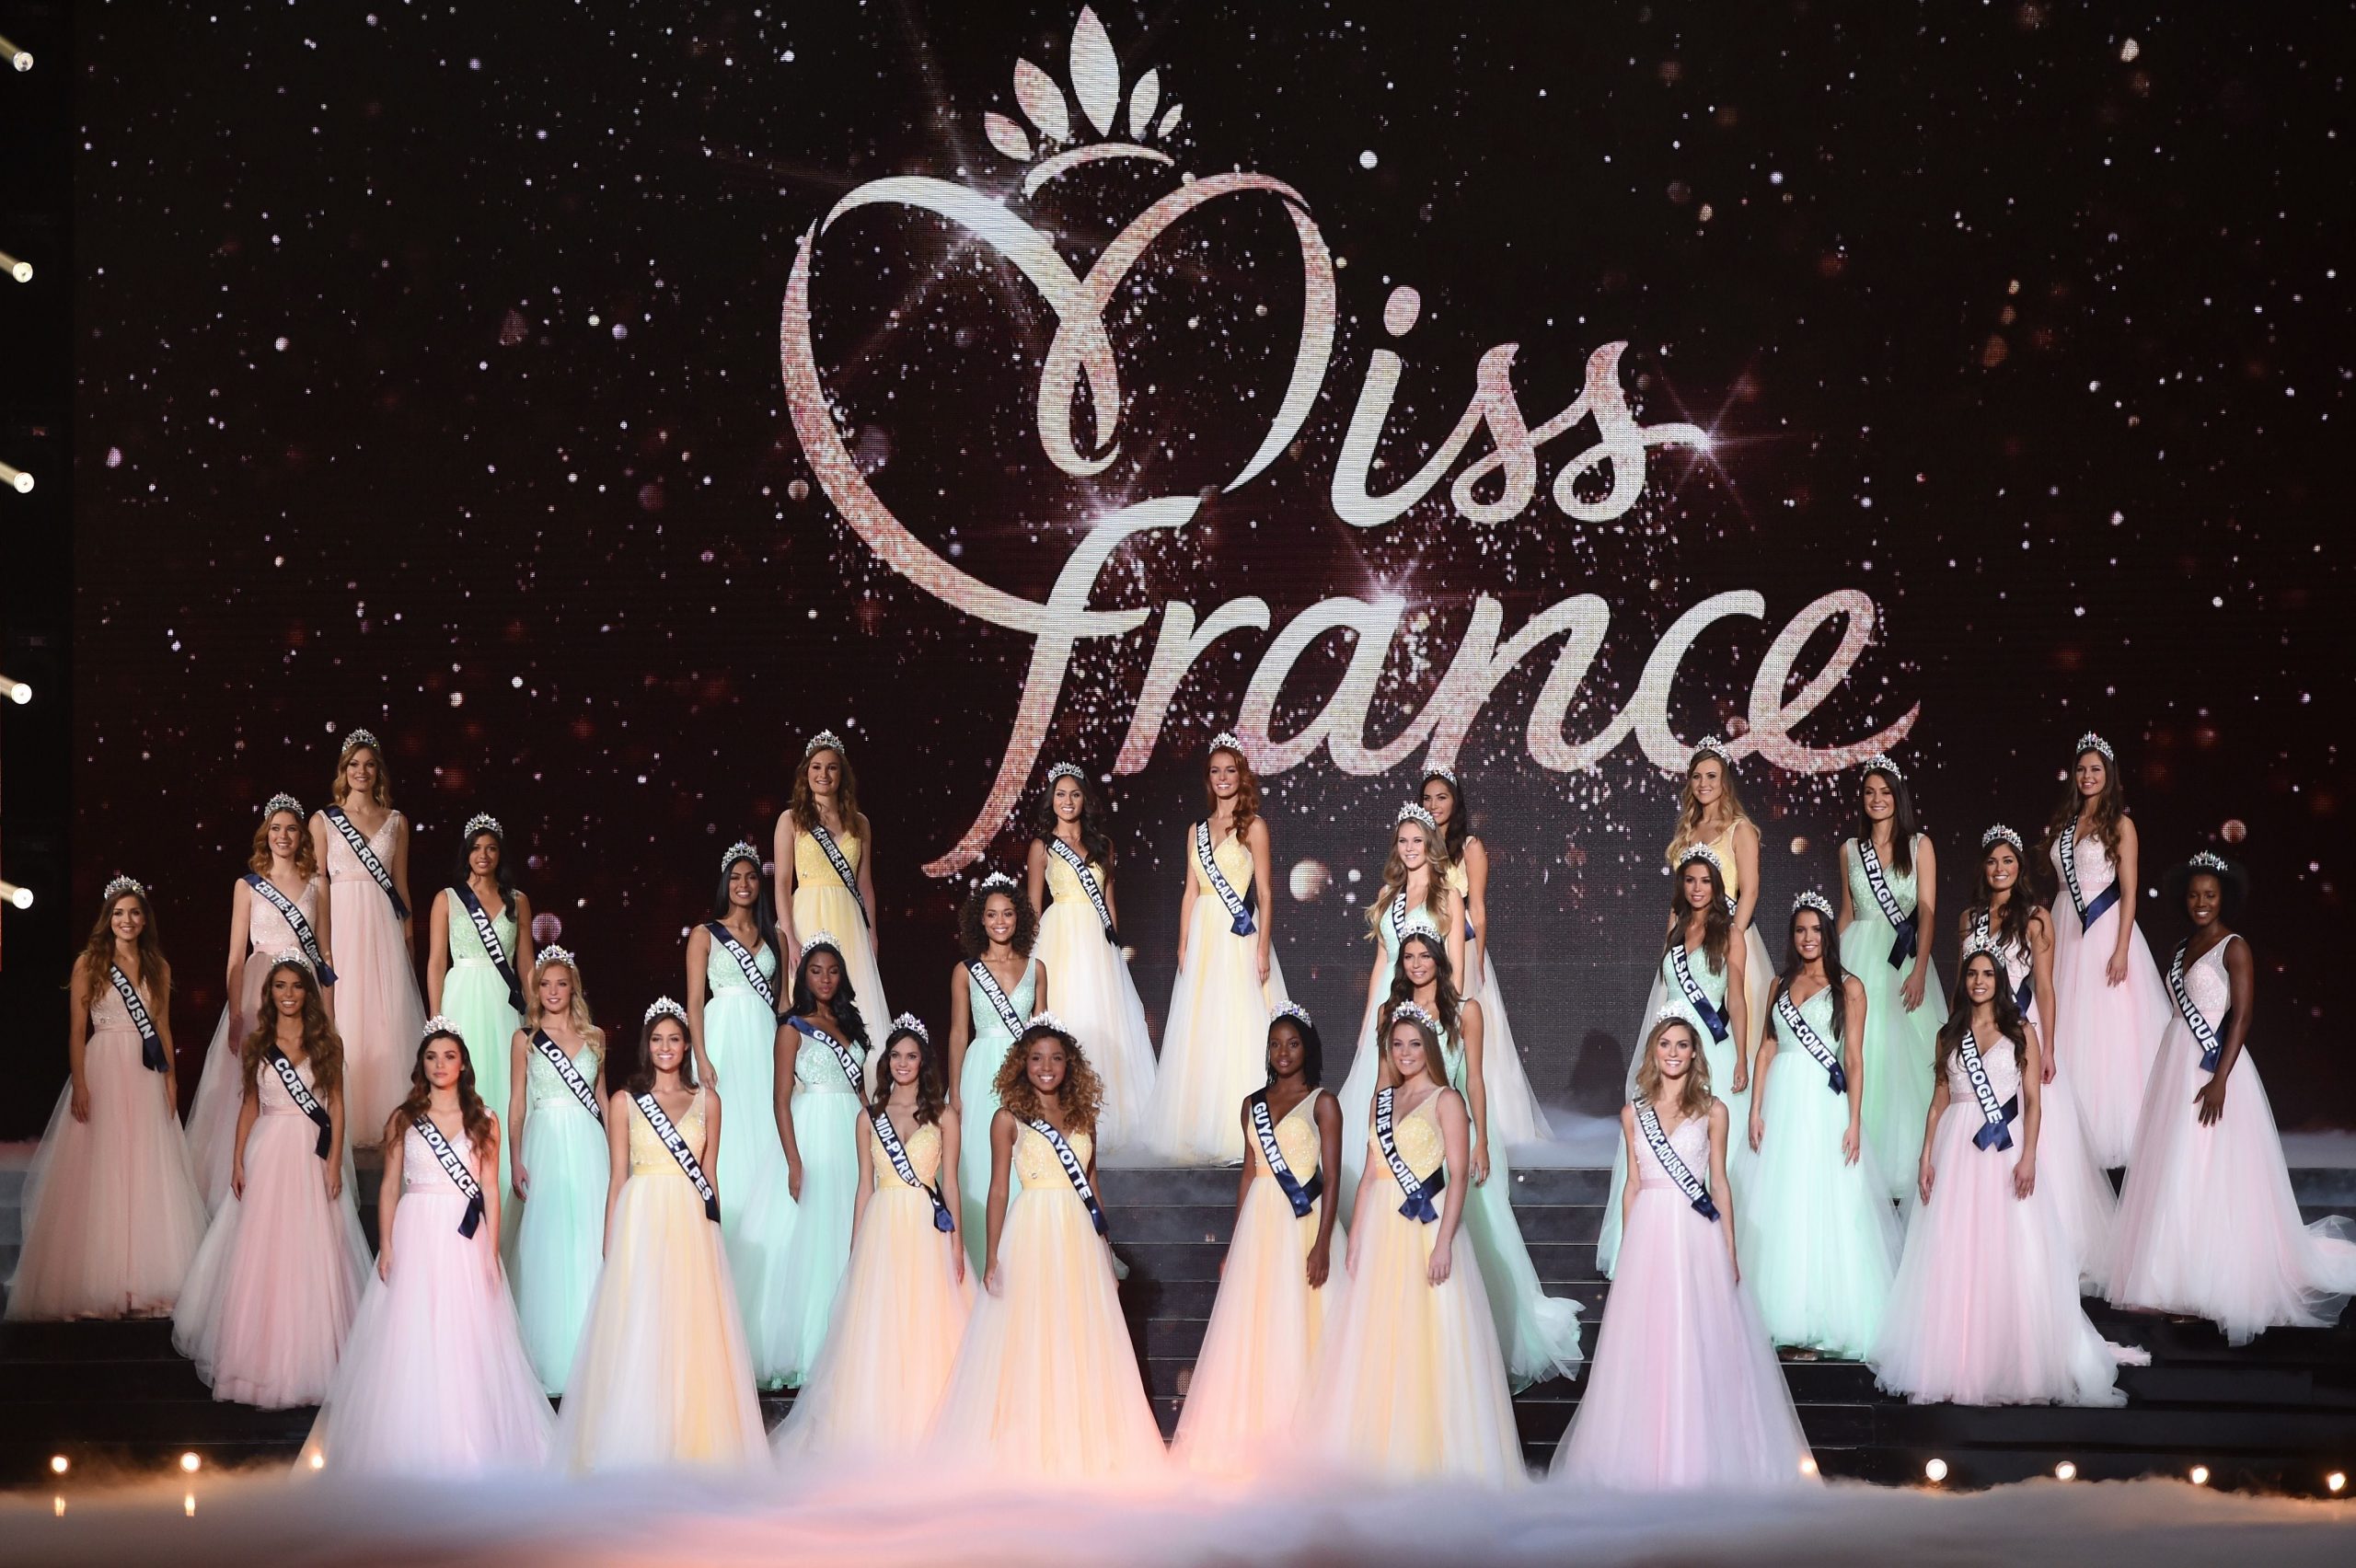 Contestants pose on stage during the Miss France 2018 pageant in Chateauroux, central France, on December 16, 2017.